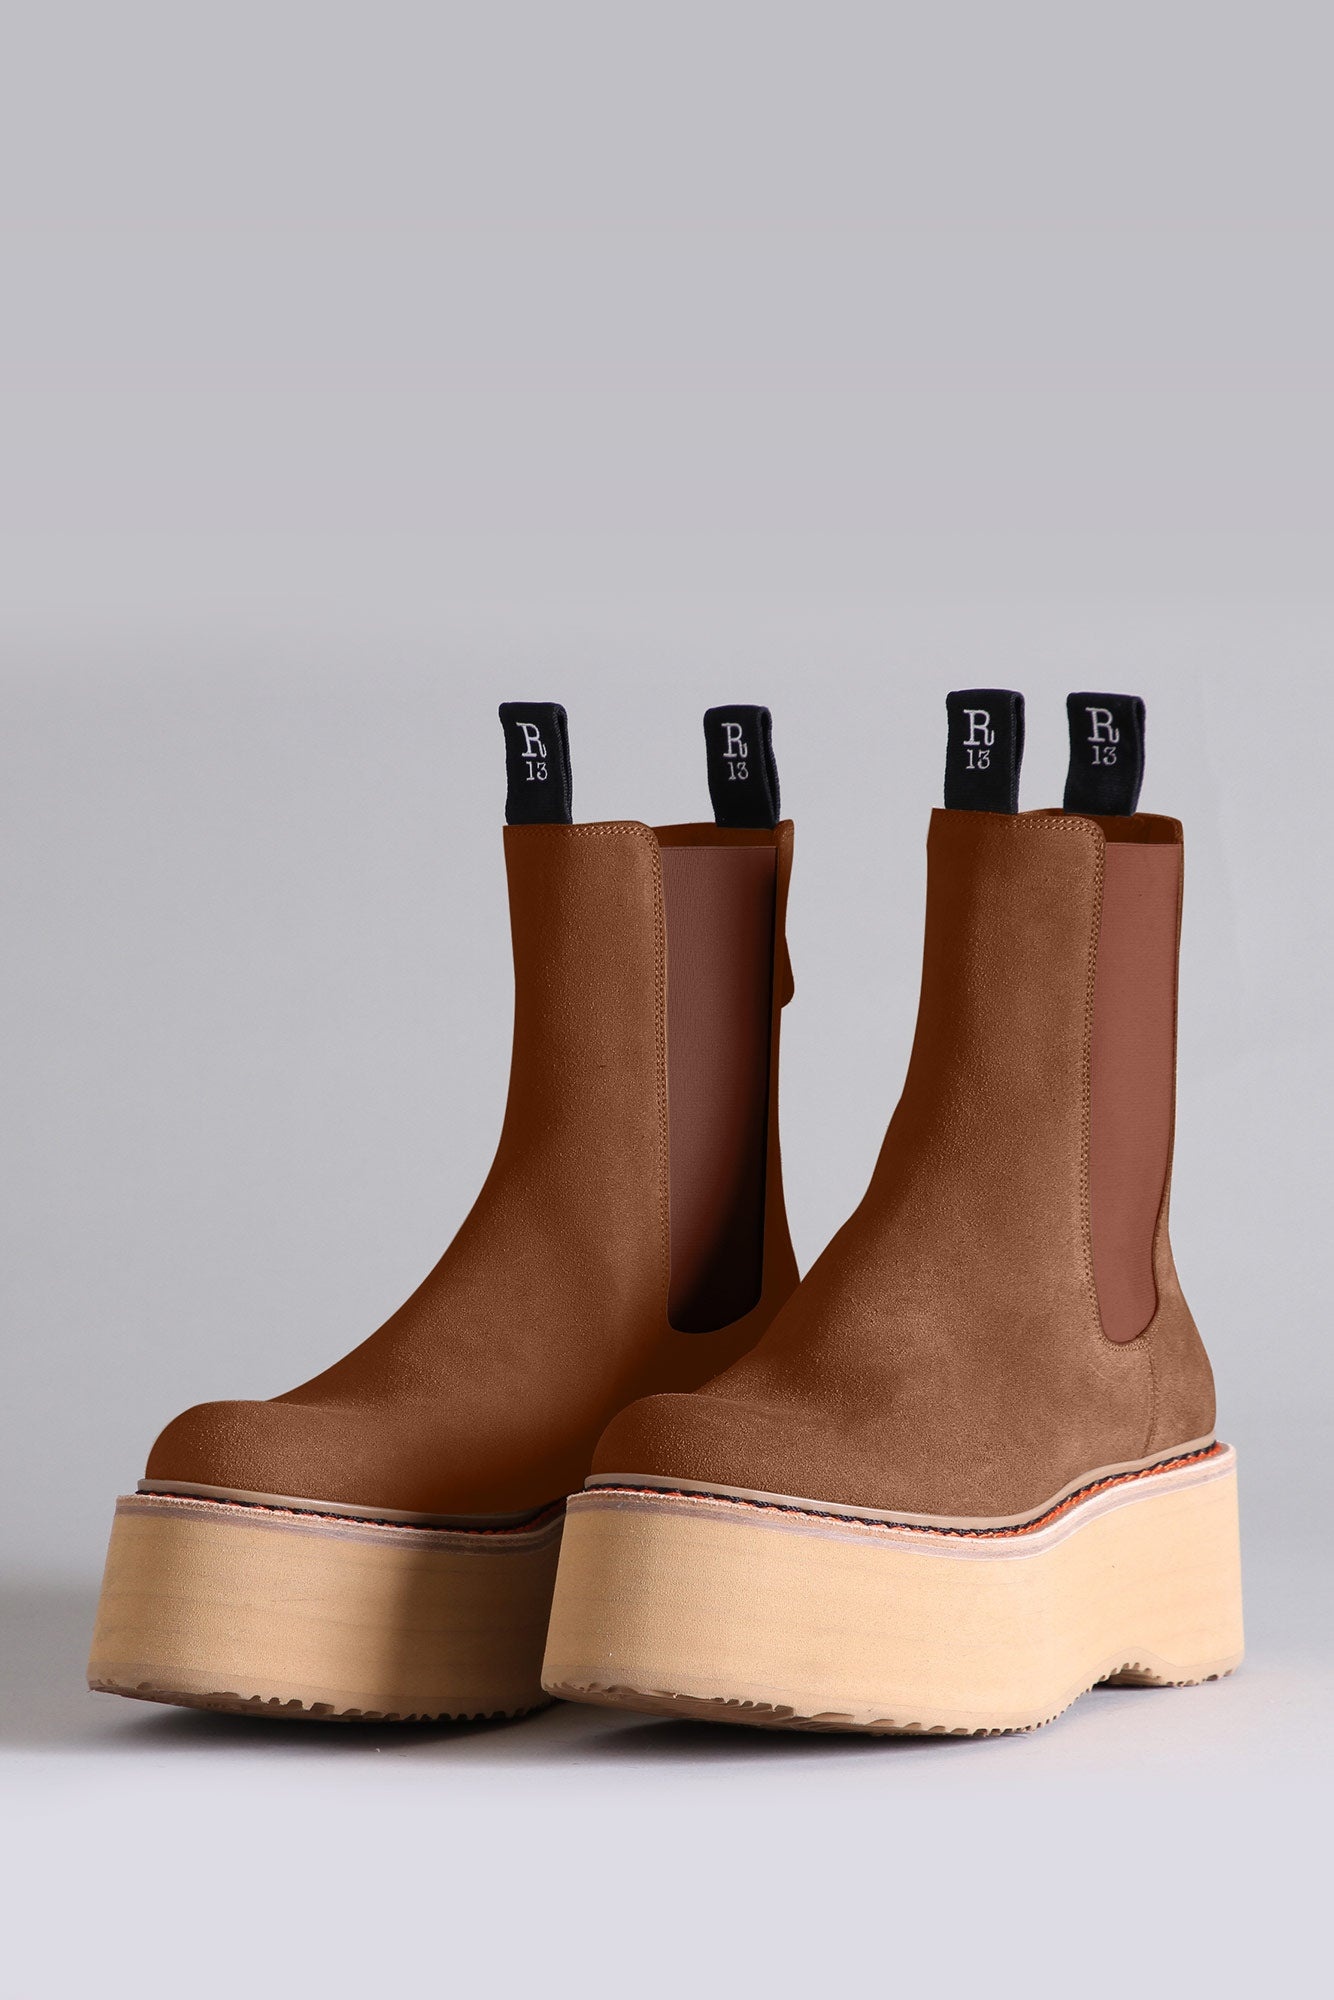 DOUBLE STACK CHELSEA BOOT - BROWN SUEDE | R13 - 1